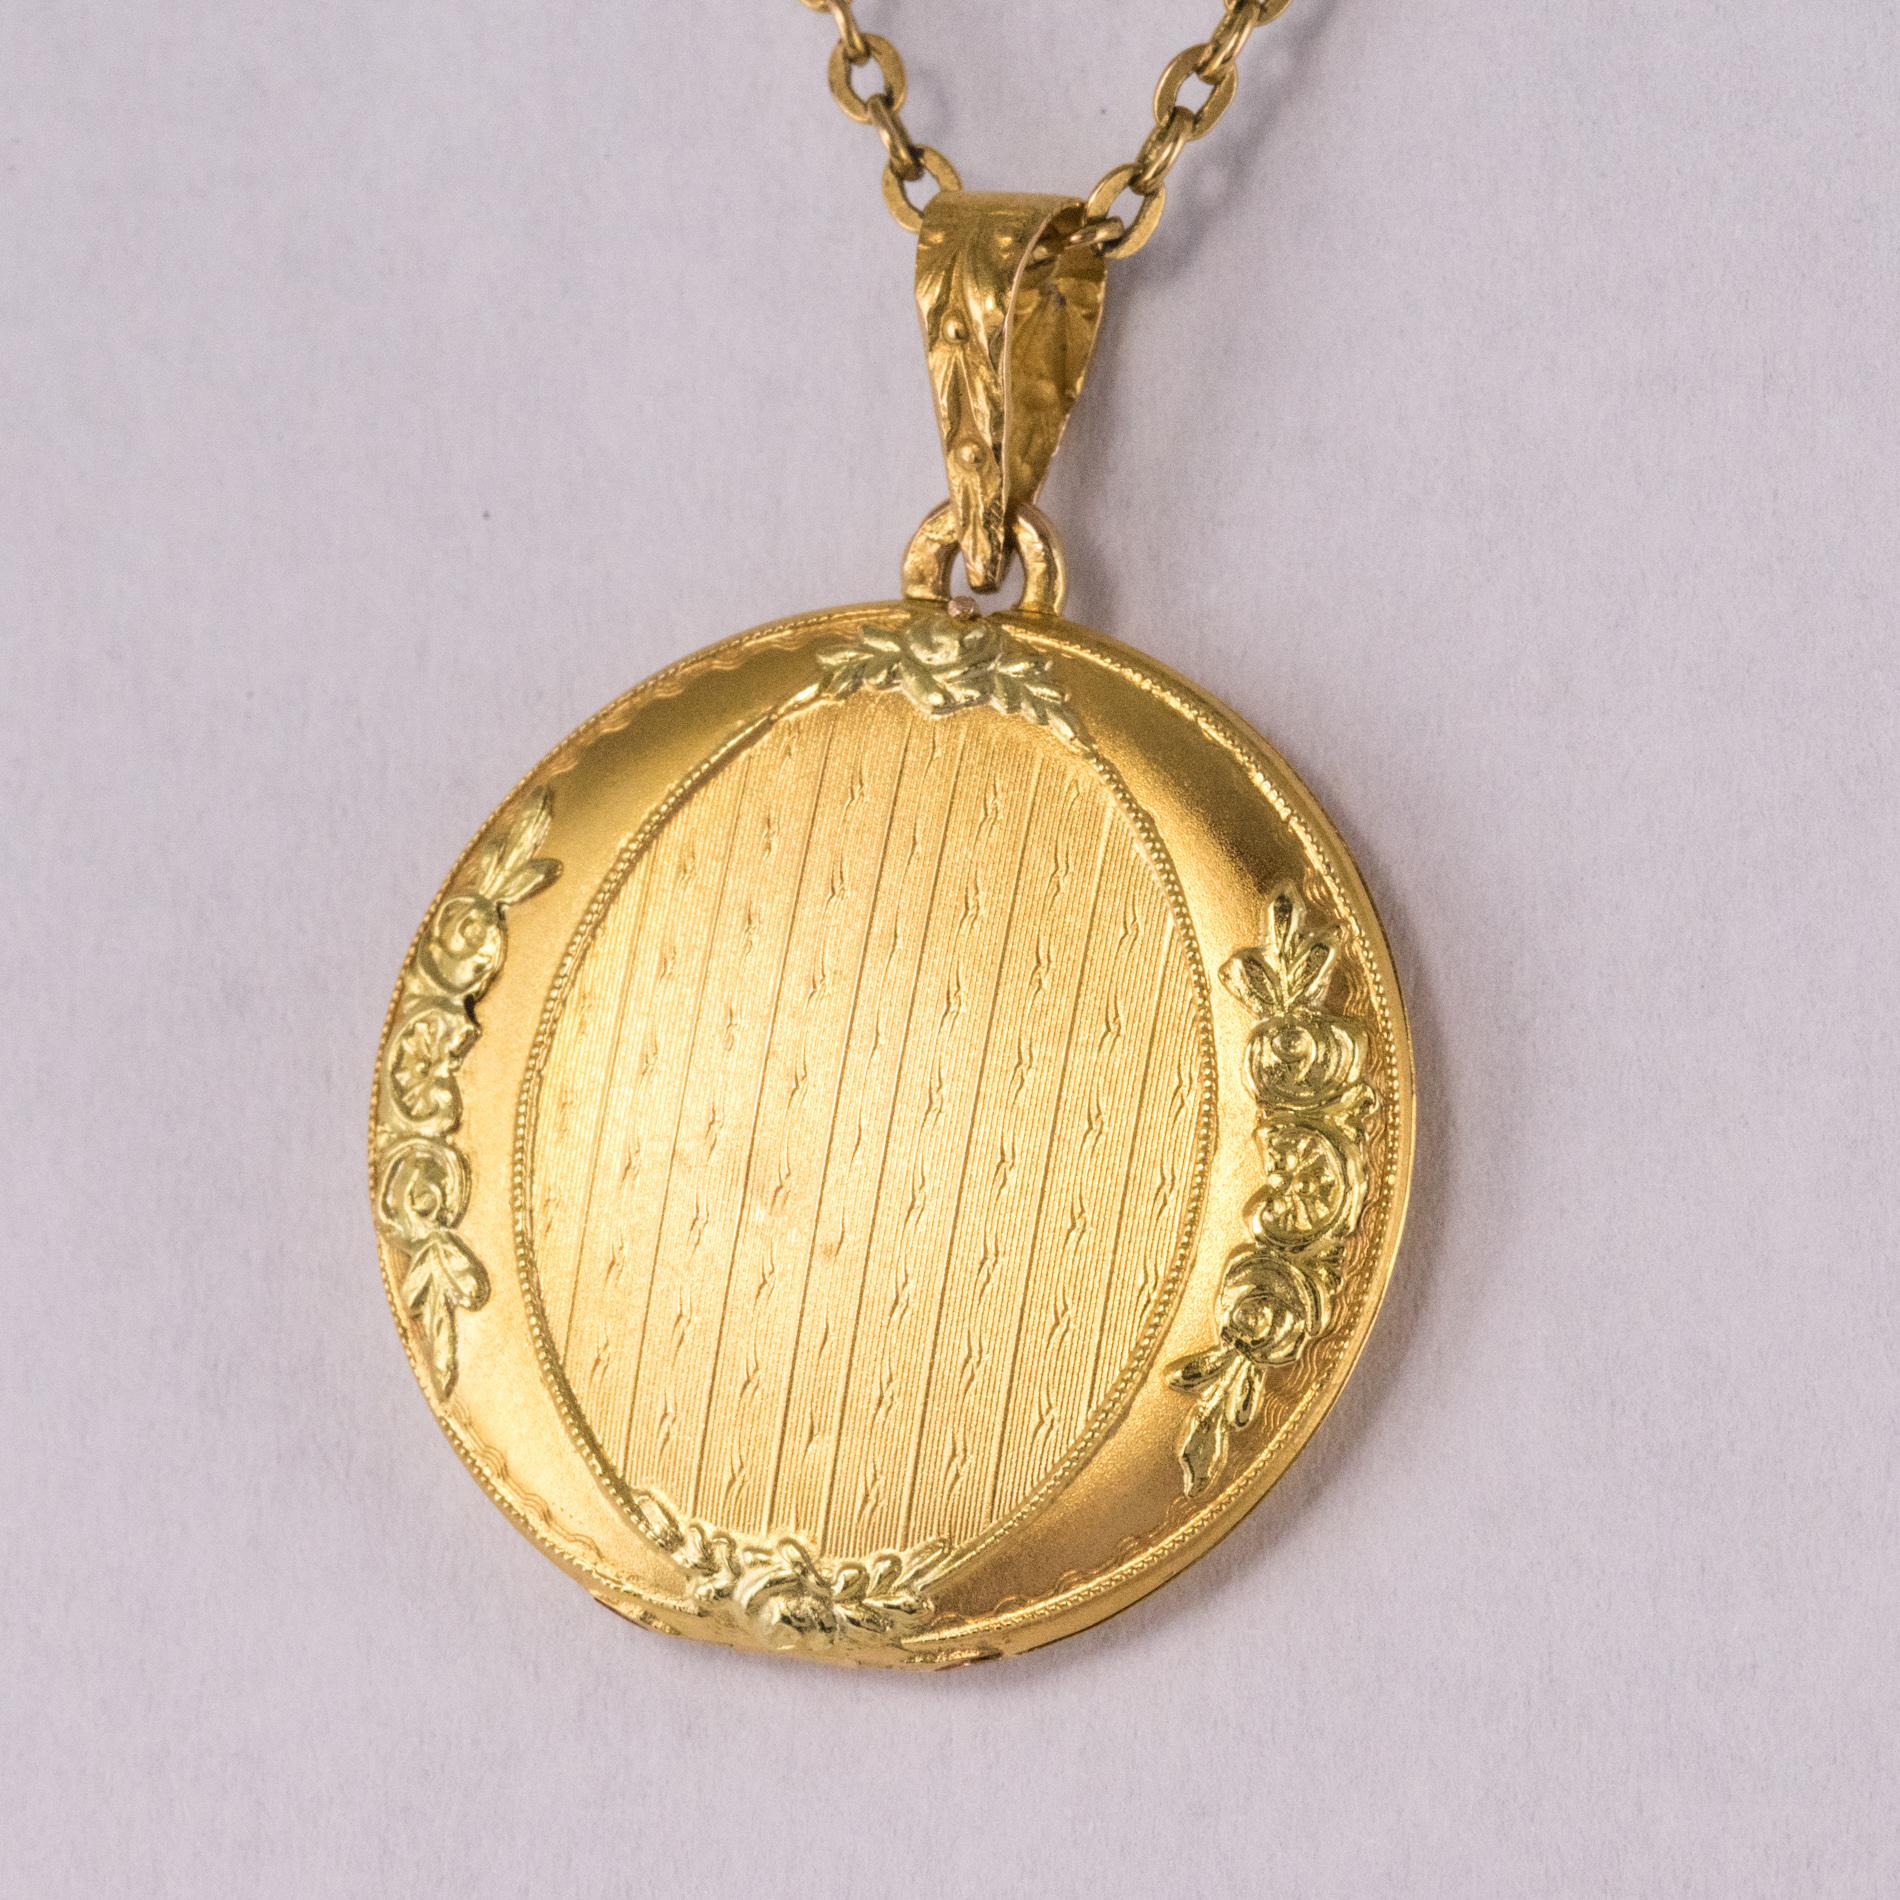 Belle Époque French 1900s 18 Karat Green and Yellow Gold Locket Pendant